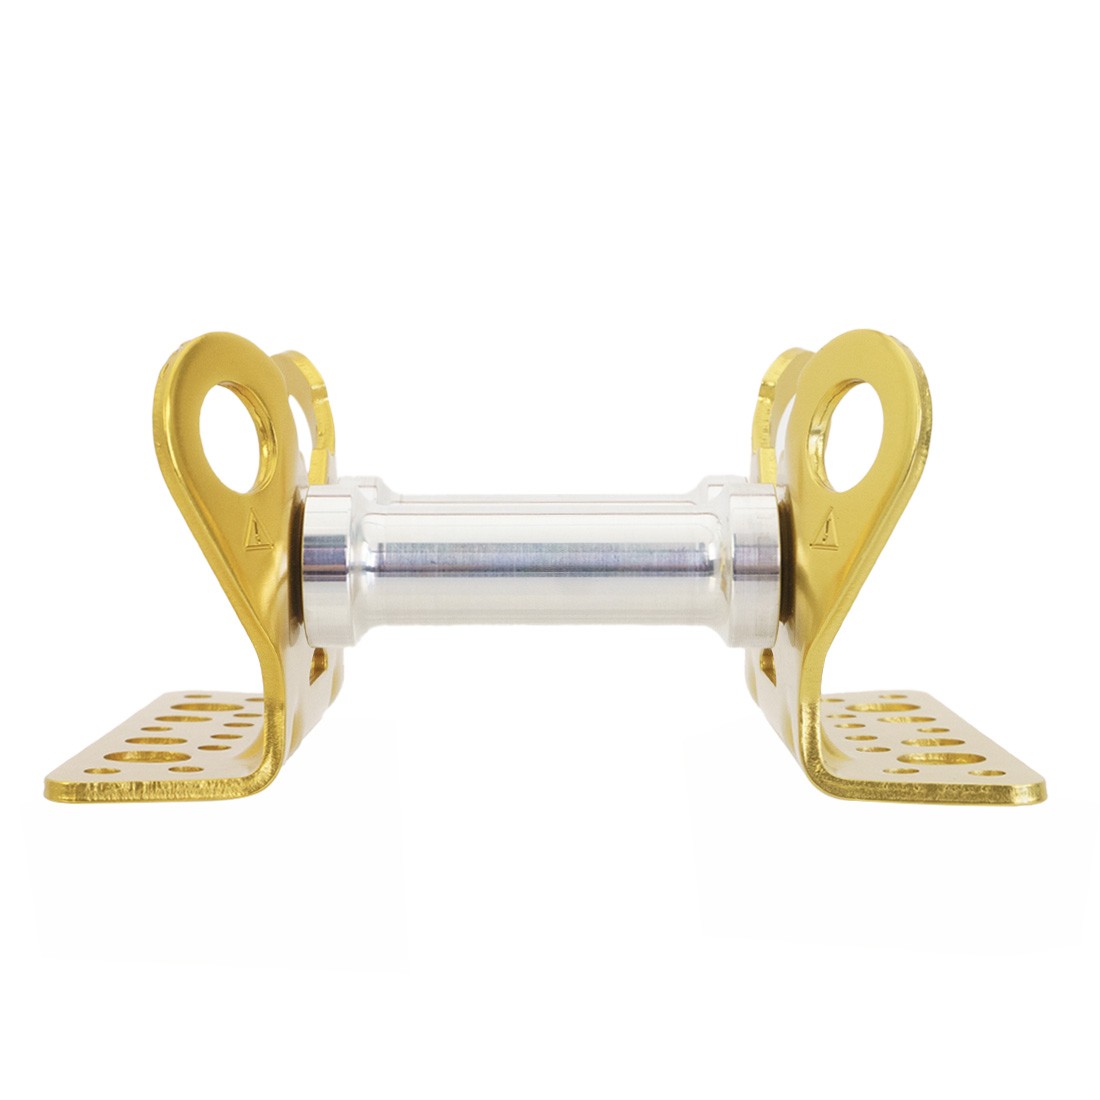 Petzl Roller Coaster Rope Protector Side View